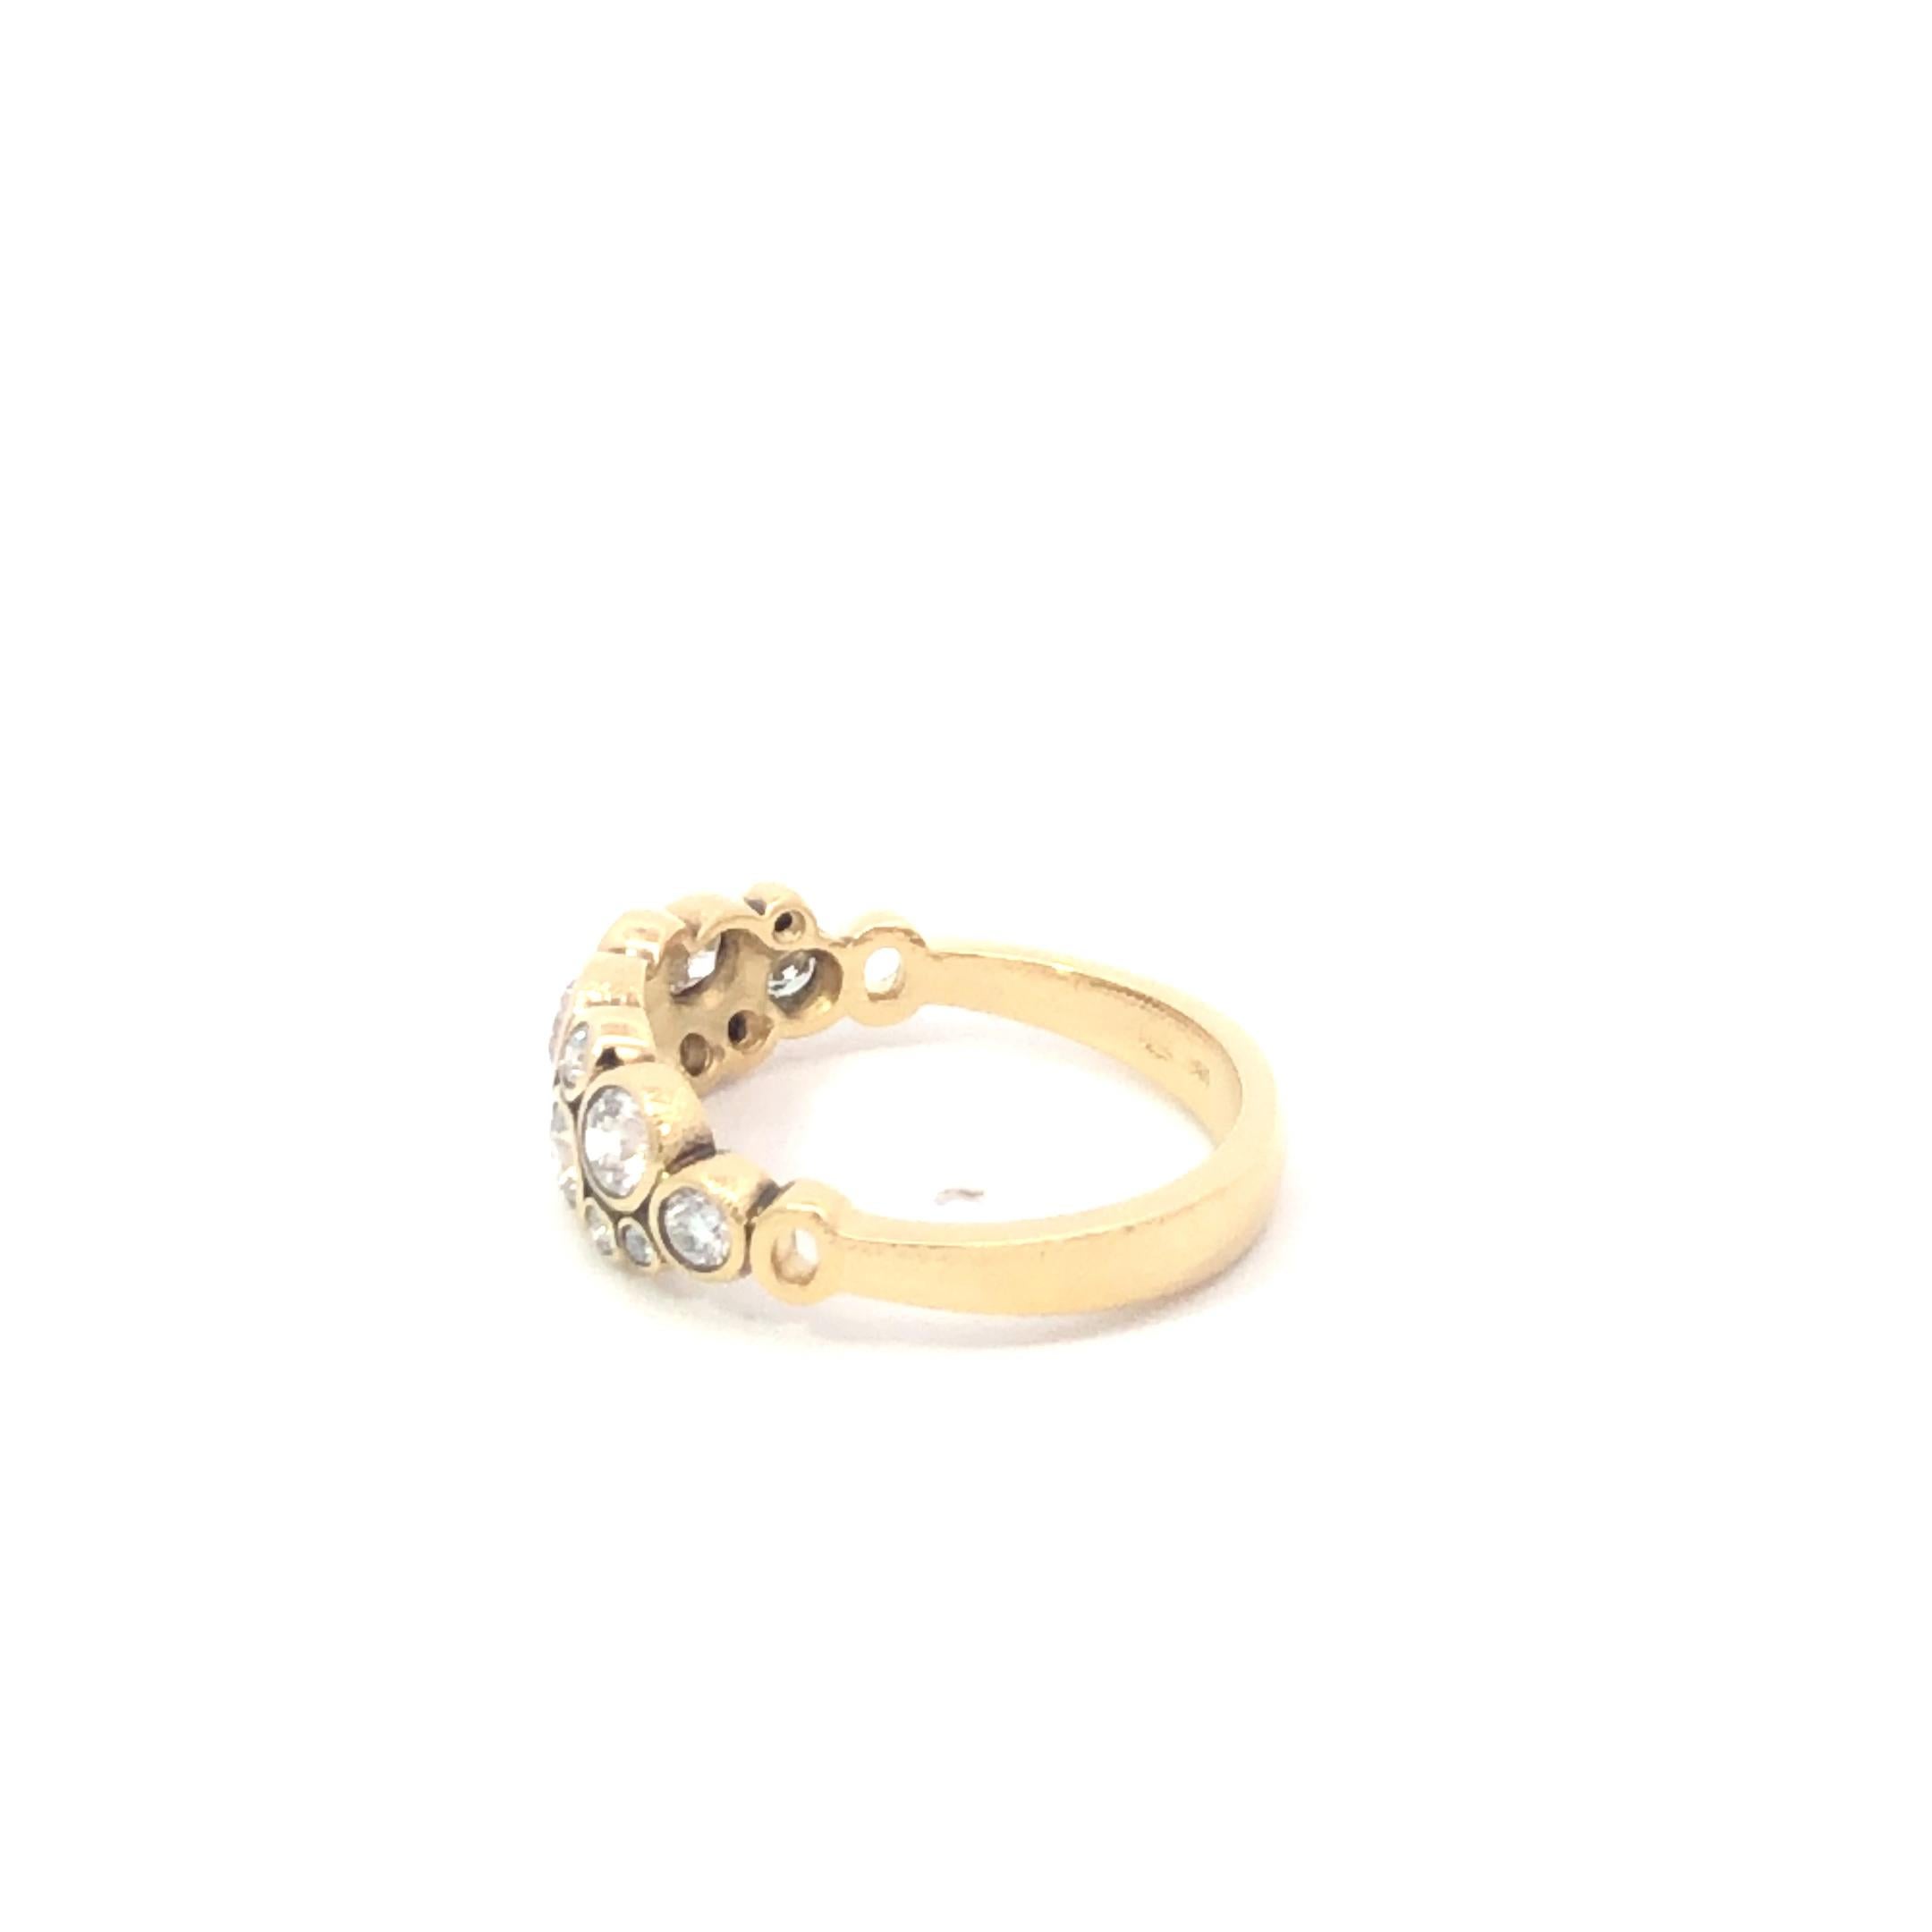 18K Yellow Gold and Diamond Ring, 
The ring features 15 white diamonds. (0.95ct.),
Size 6.75
4.2 Grams